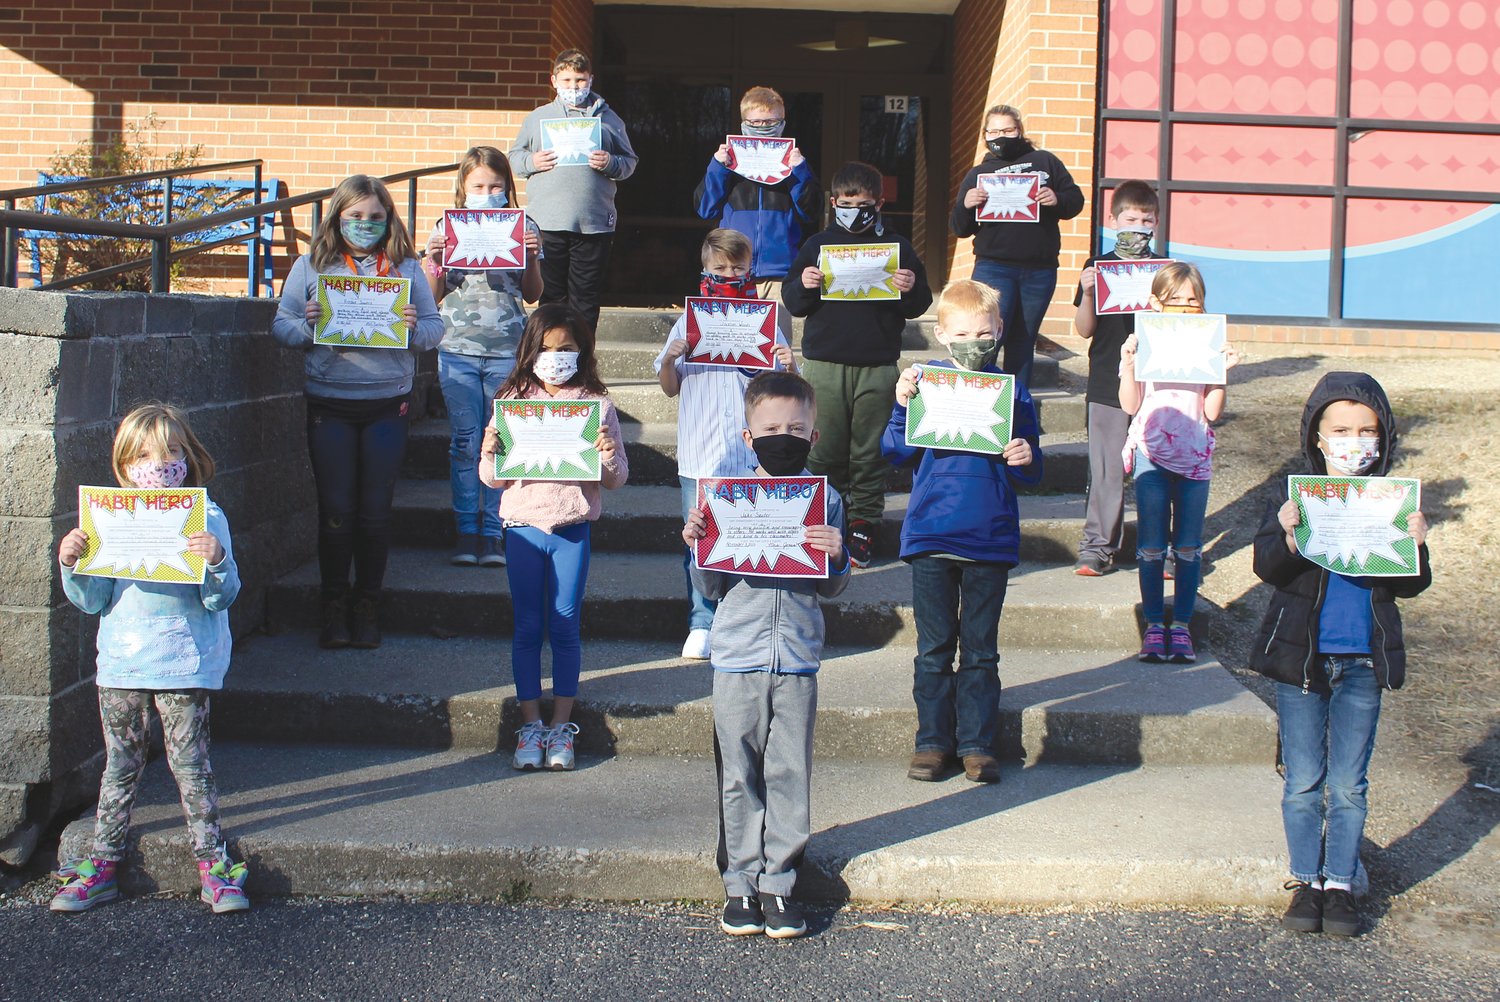 Turkey Run Elementary students have been named for the October Habit Hero Awards. These awards are given to students who set a good example in one of the Leader in Me habits. Awards are presented by staff members to students who they believe have excelled in one of the habits. Winners for the month of October are front, Ashton Foxworthy, Jake Sauter and Kayden Linthicum; second row, Arelynn Agosto-Garcia and Tate Wann, third row, Preslee Sowers, Jaxson Woods and Lorie Reynolds; fourth row, Aubree Martin, Kolten Myers and Colt Martin; back row, Colin Ortiz, Nate Vandivier and Blakelynn Dice. Not pictured is Leah Mathis.